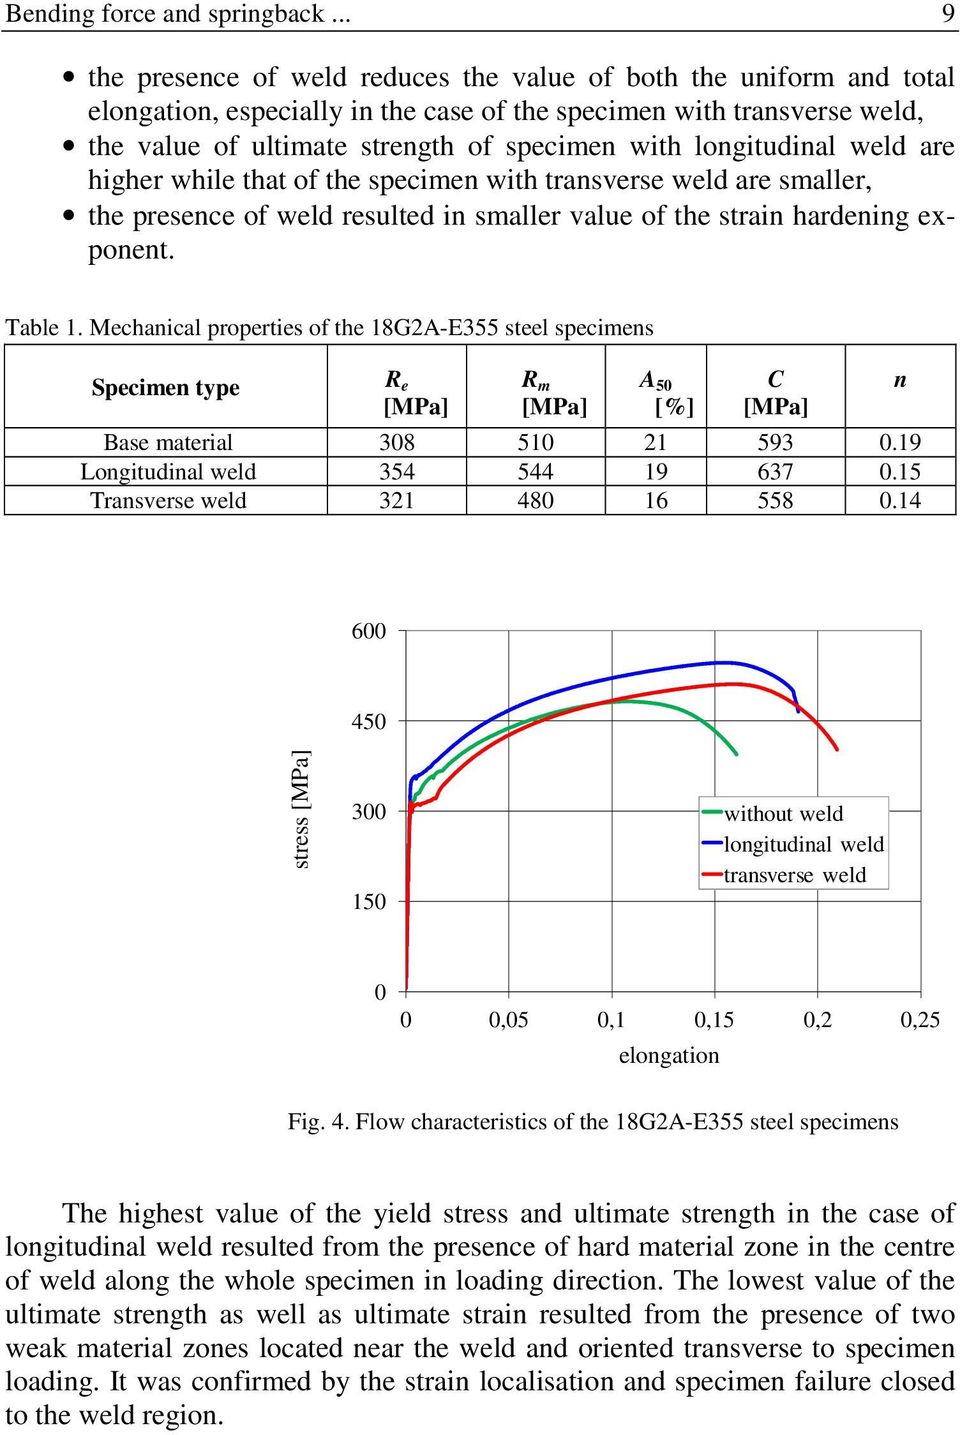 longitudinal weld are higher while that of the specimen with transverse weld are smaller, the presence of weld resulted in smaller value of the strain hardening exponent. Table 1.